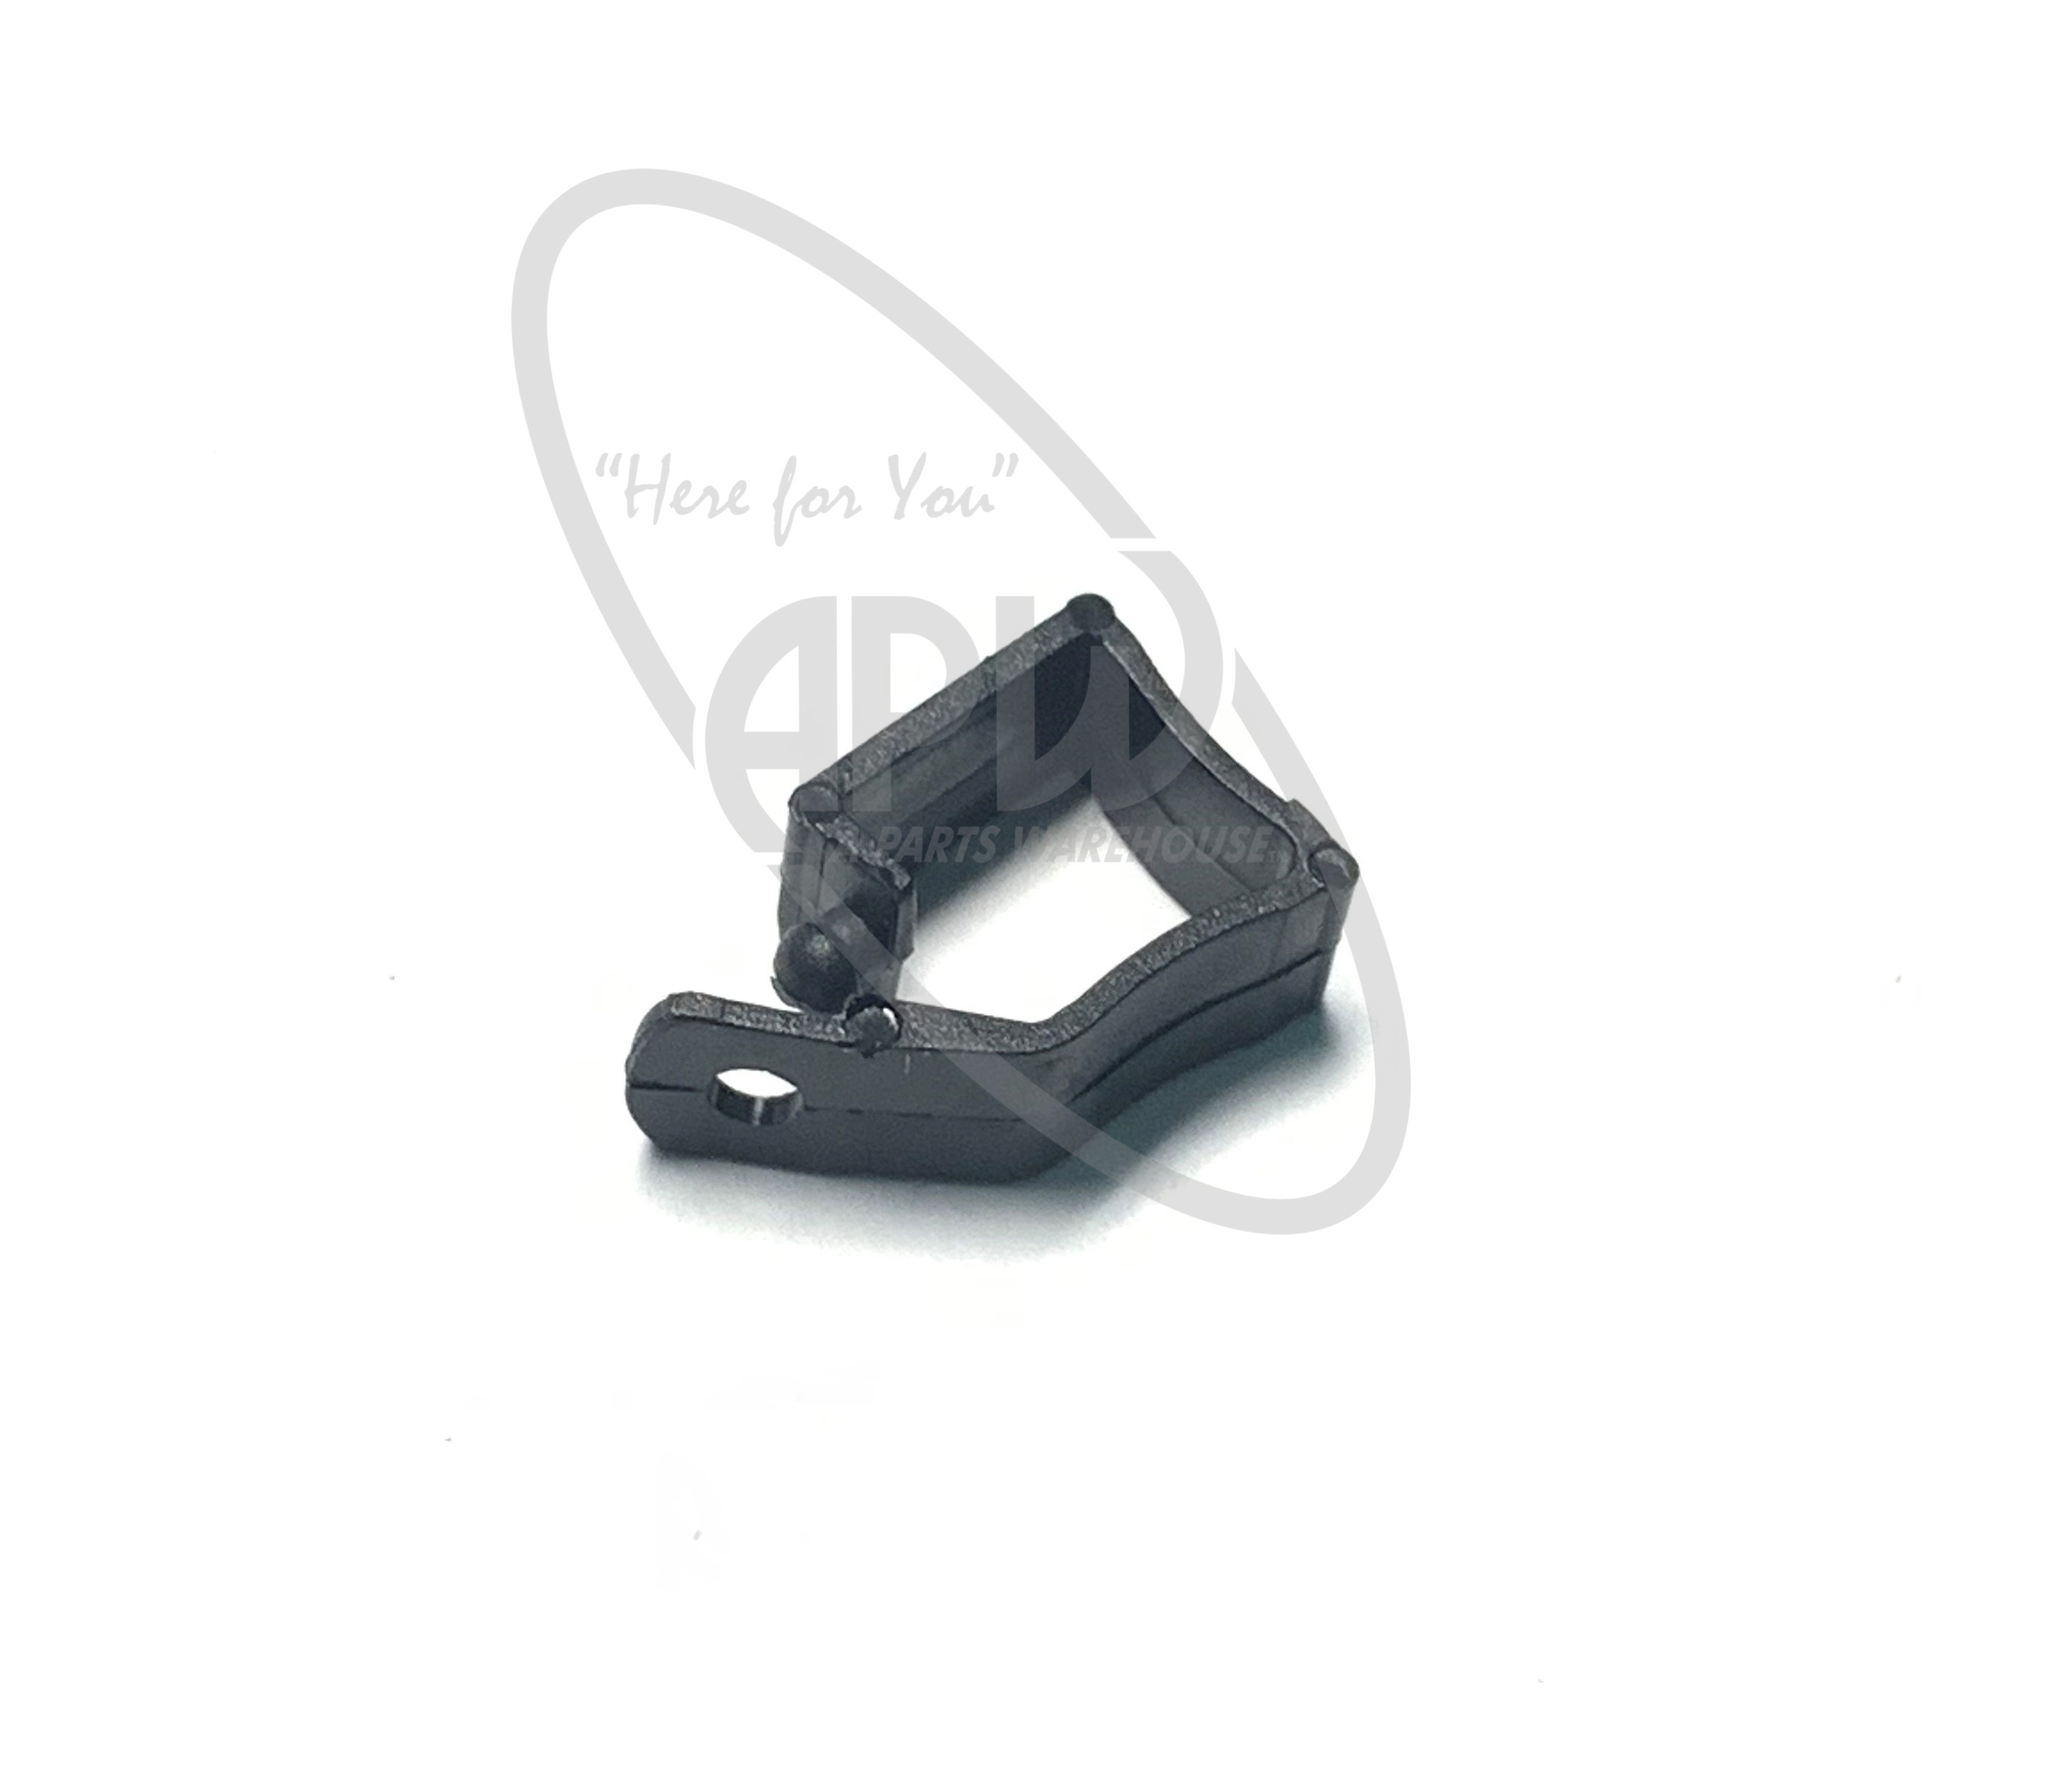 Wet Hose Clip for U-Channel image picture